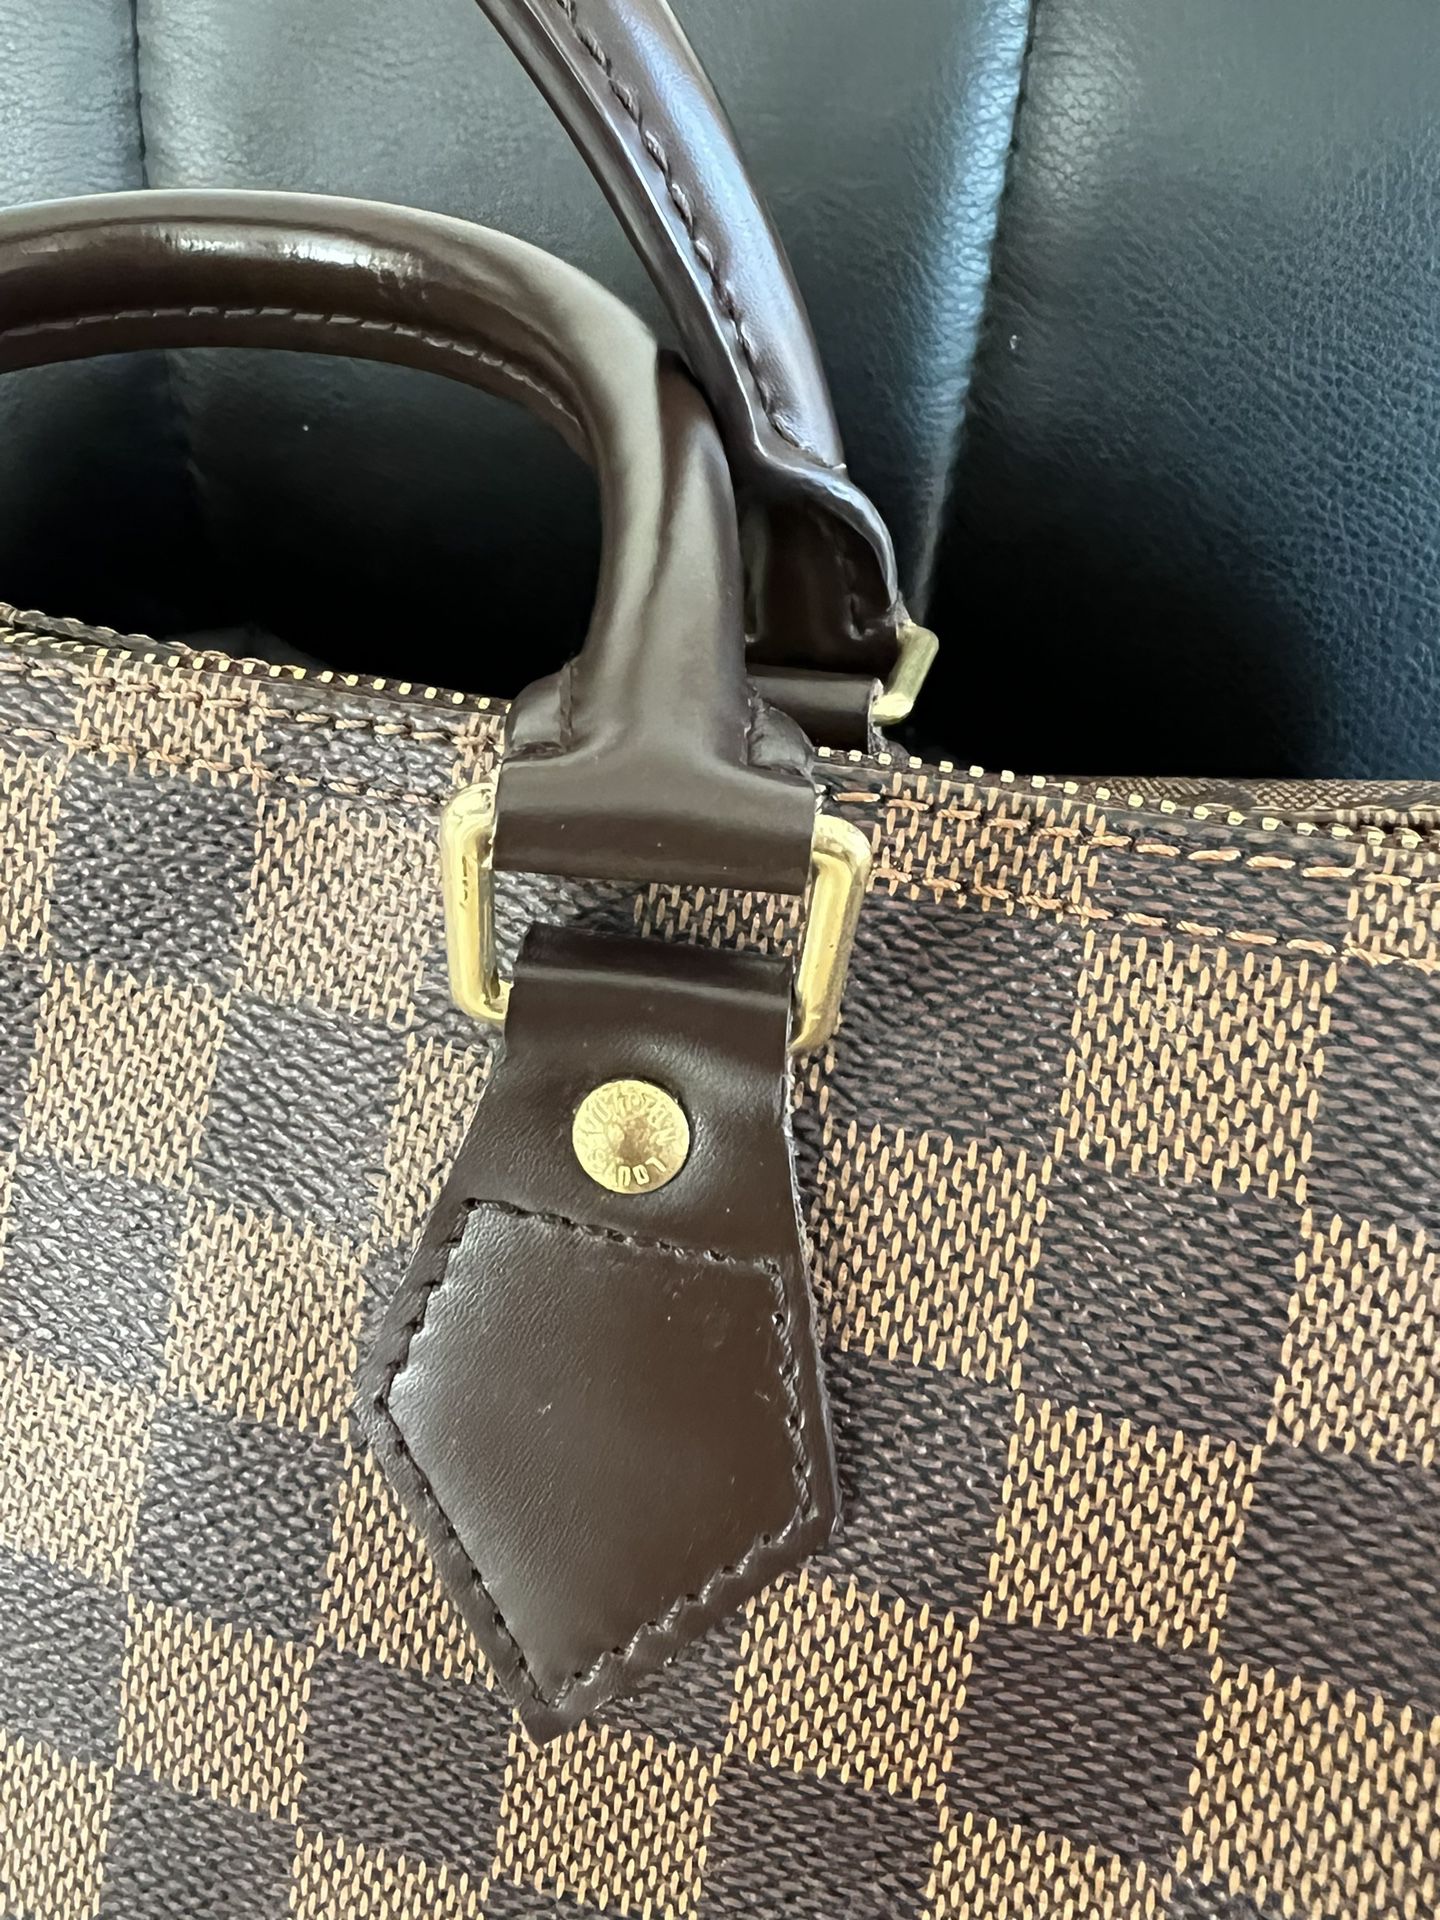 Louis Vuitton Speedy 35 Authentic for Sale in Andover, MA - OfferUp